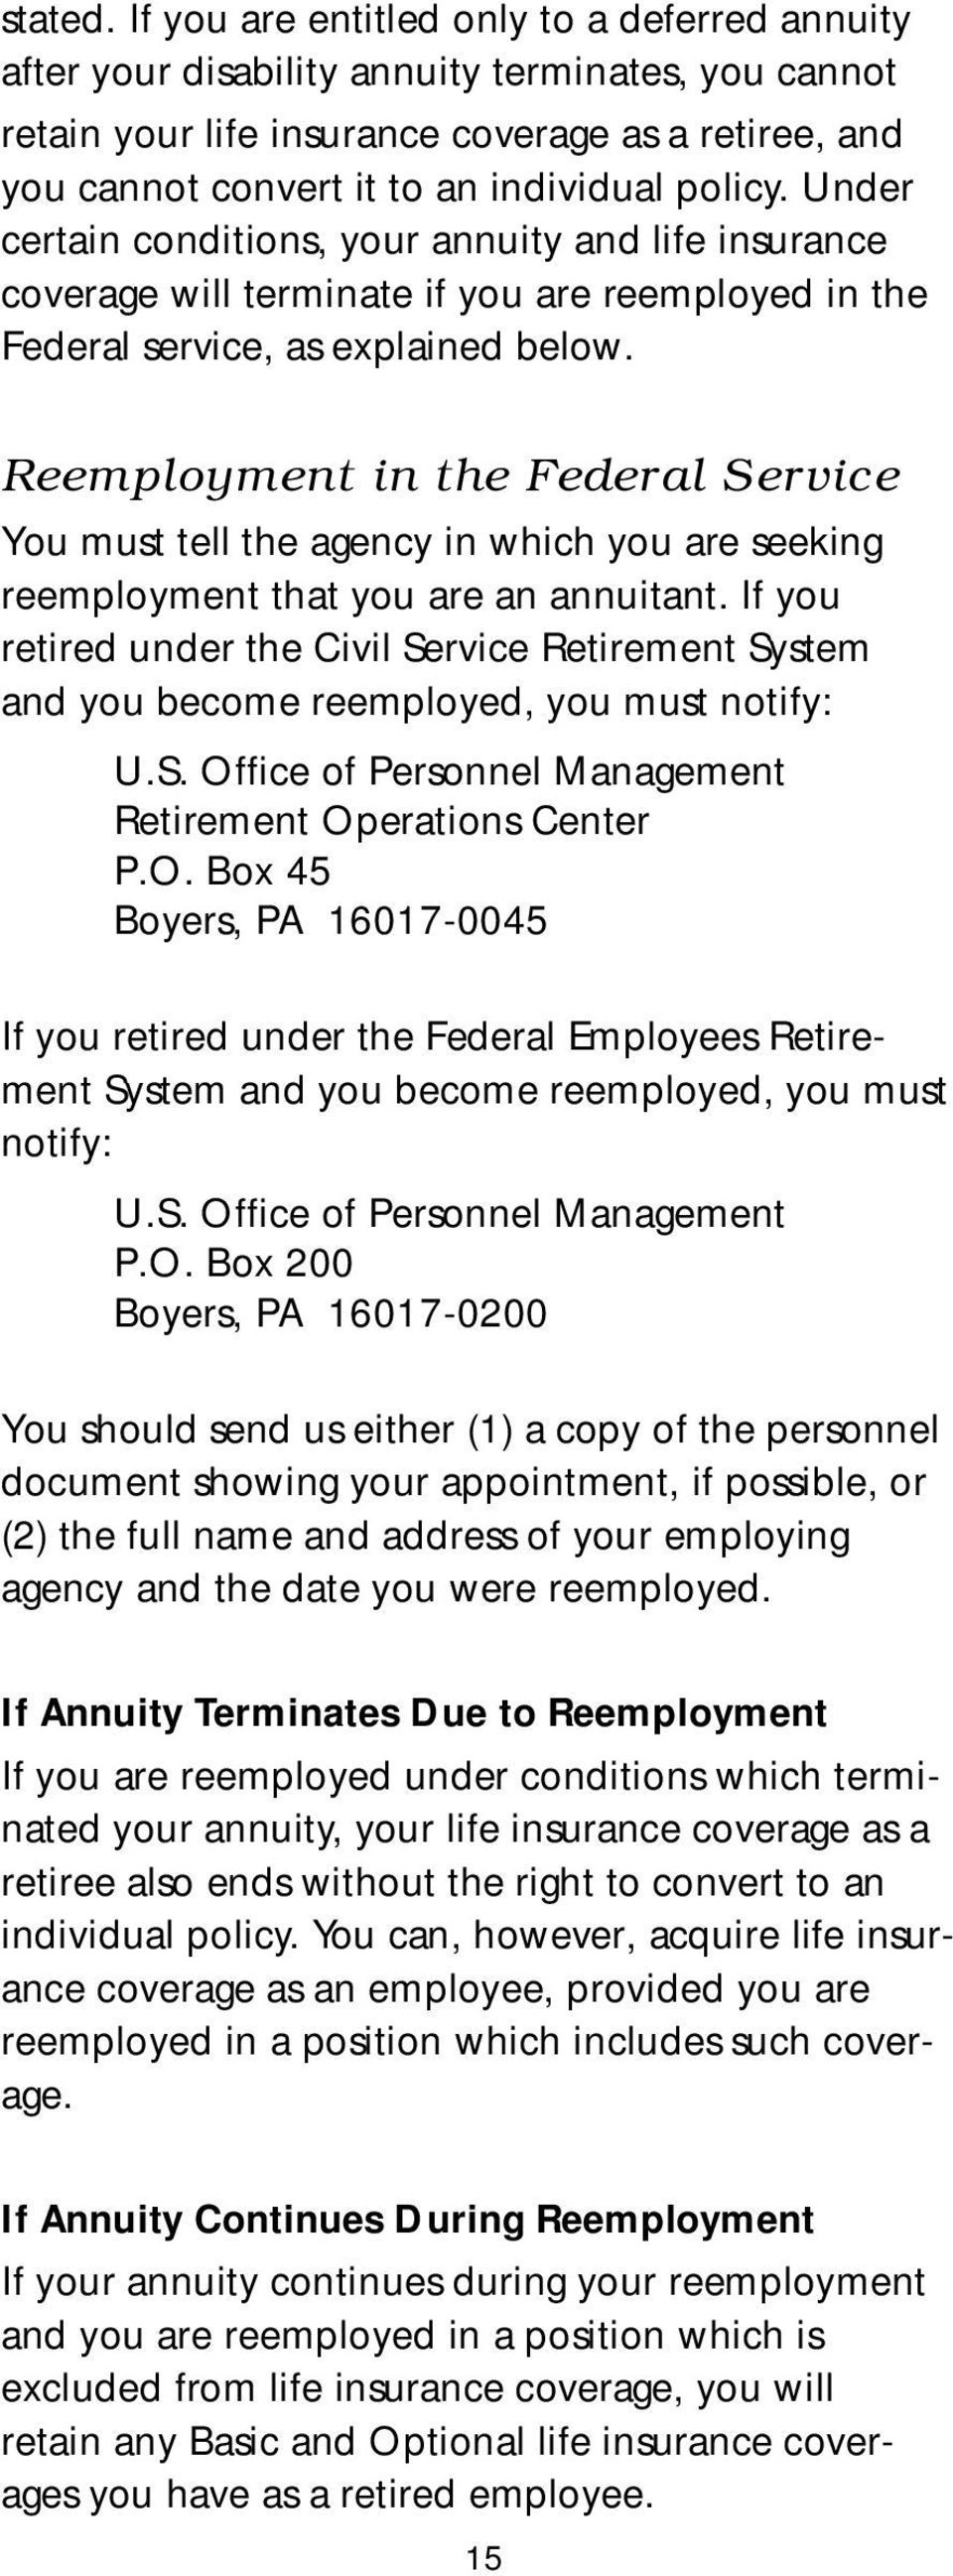 Under certain conditions, your annuity and life insurance coverage will terminate if you are reemployed in the Federal service, as explained below.